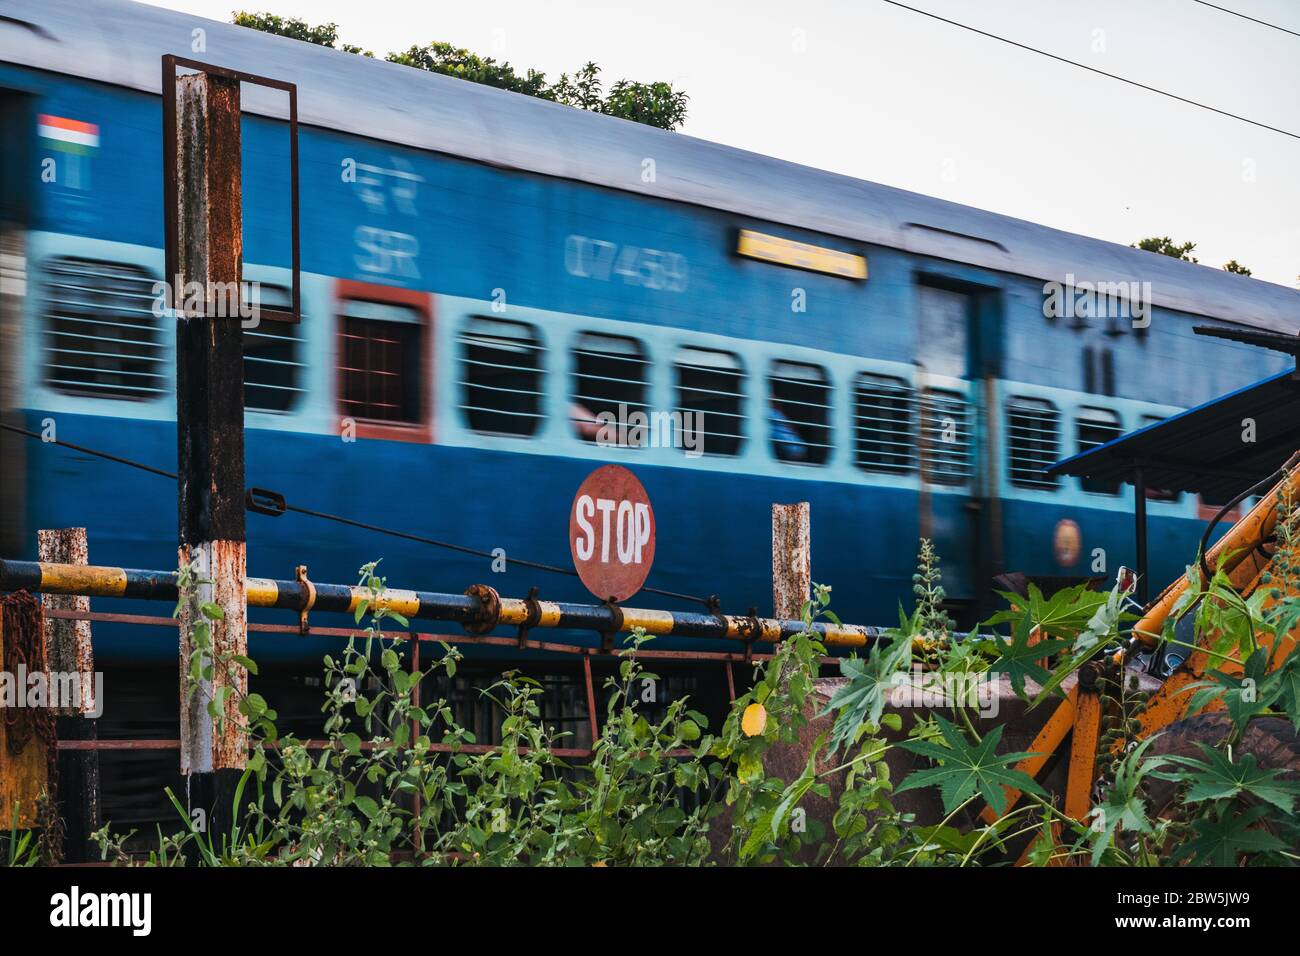 A passenger train speeds past a stop sign at a railway level crossing in Alappuzha, Kerala, India Stock Photo